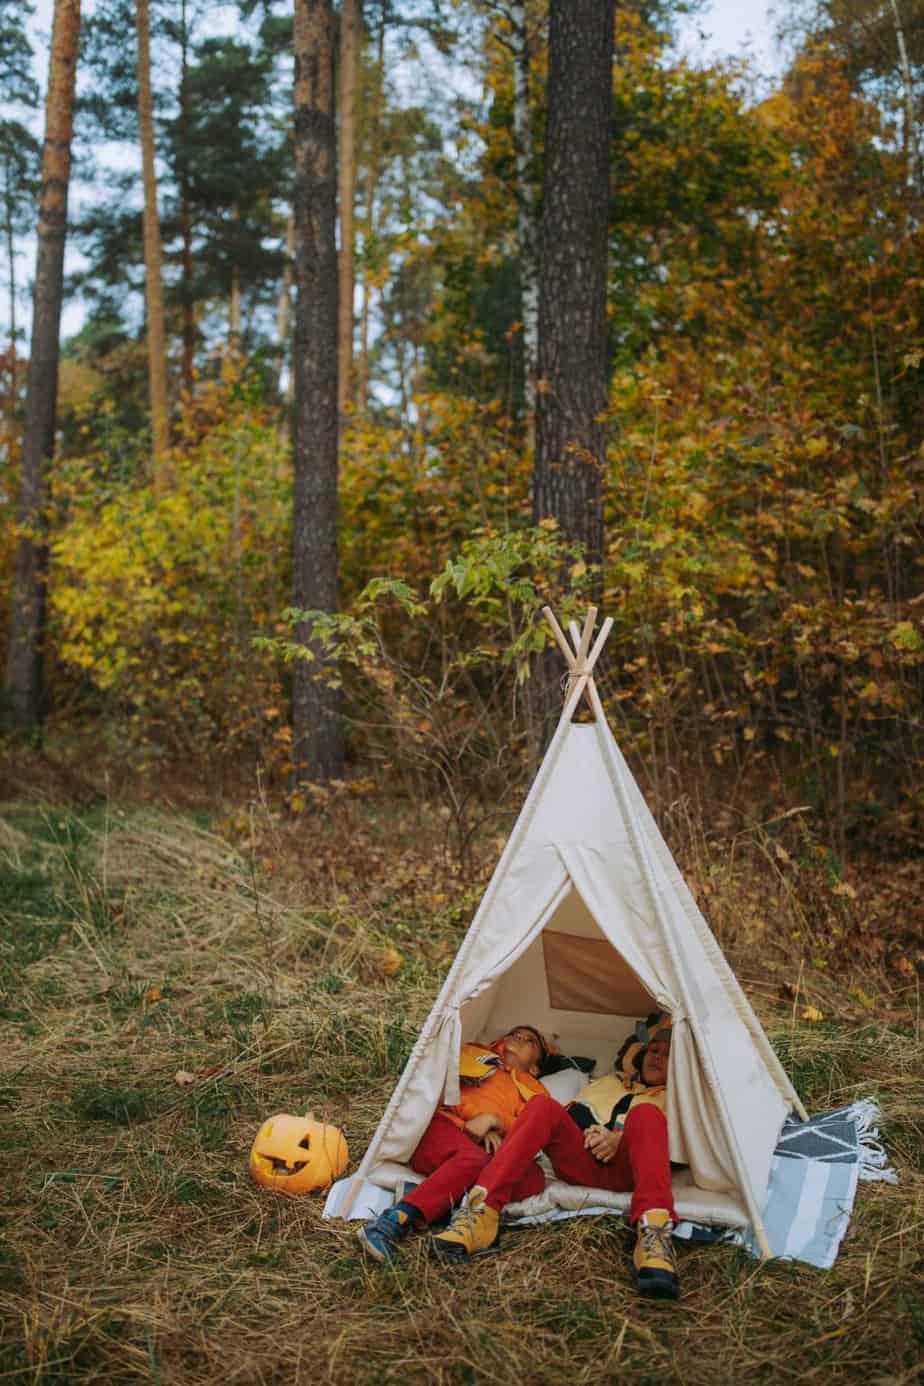 Children in a teepee hideout